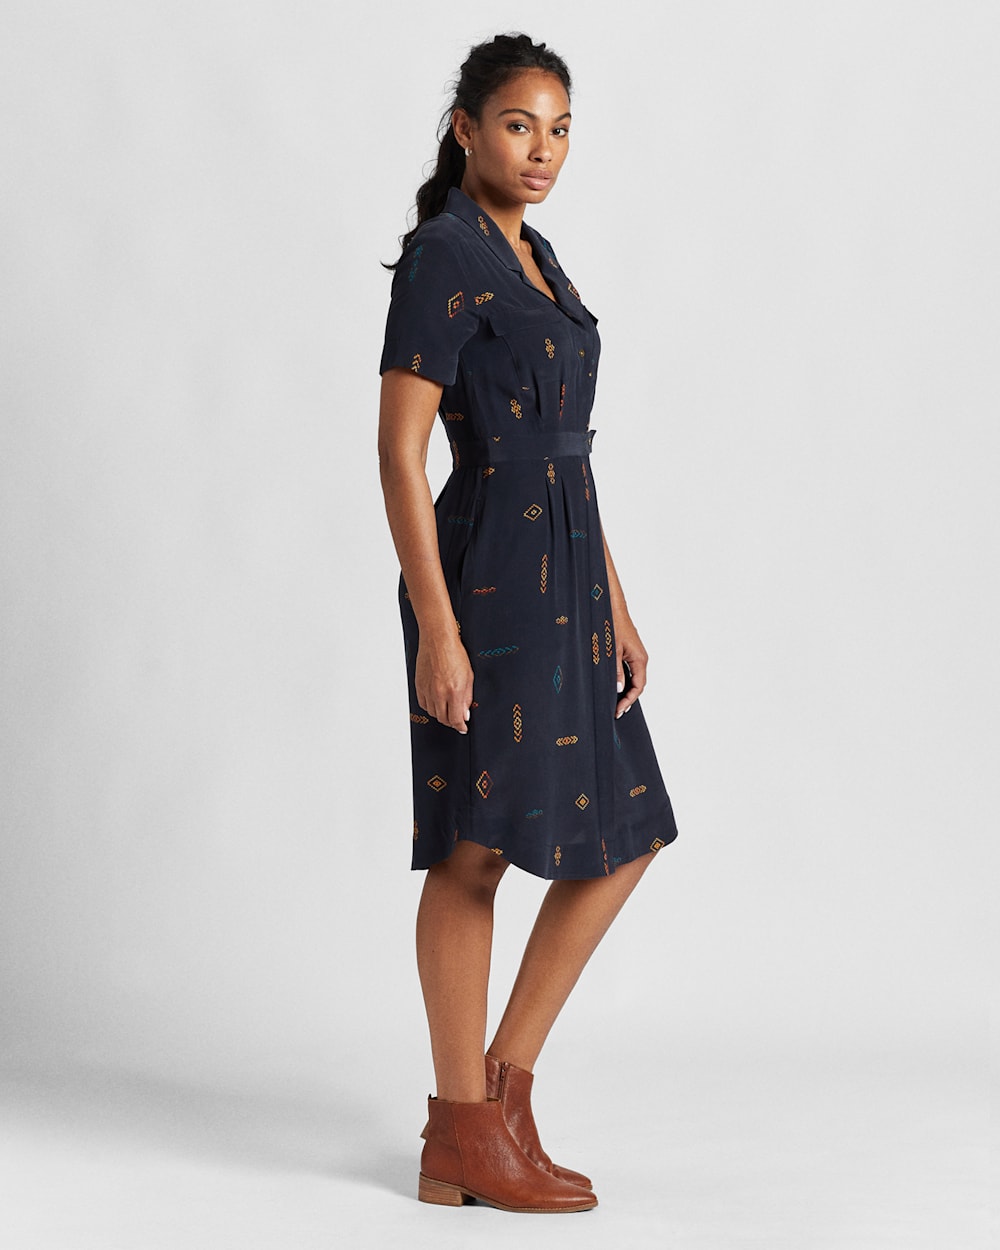 ALTERNATE VIEW OF WASHABLE SILK DRESS IN MIDNIGHT NAVY MULTI image number 3